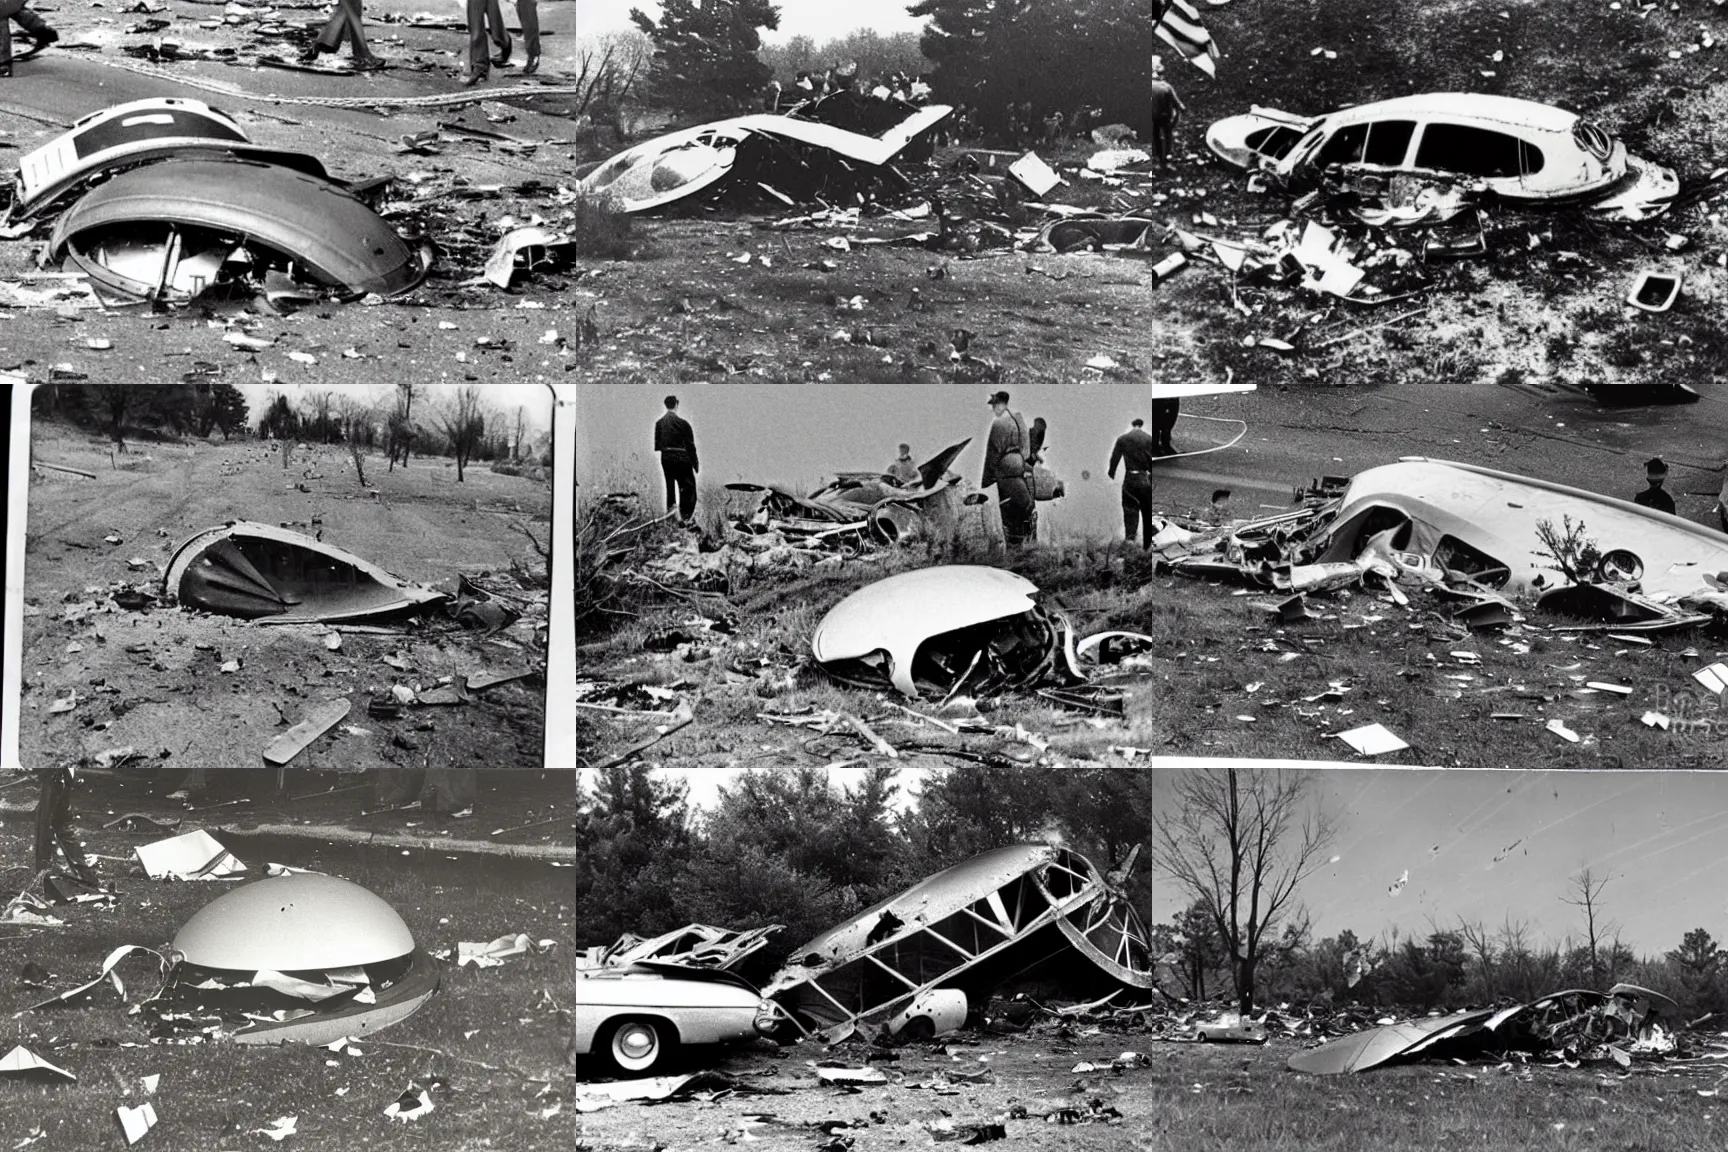 Prompt: old photograph of flying saucer crash, accident scene, 1950s, debris field, military soldiers nearby